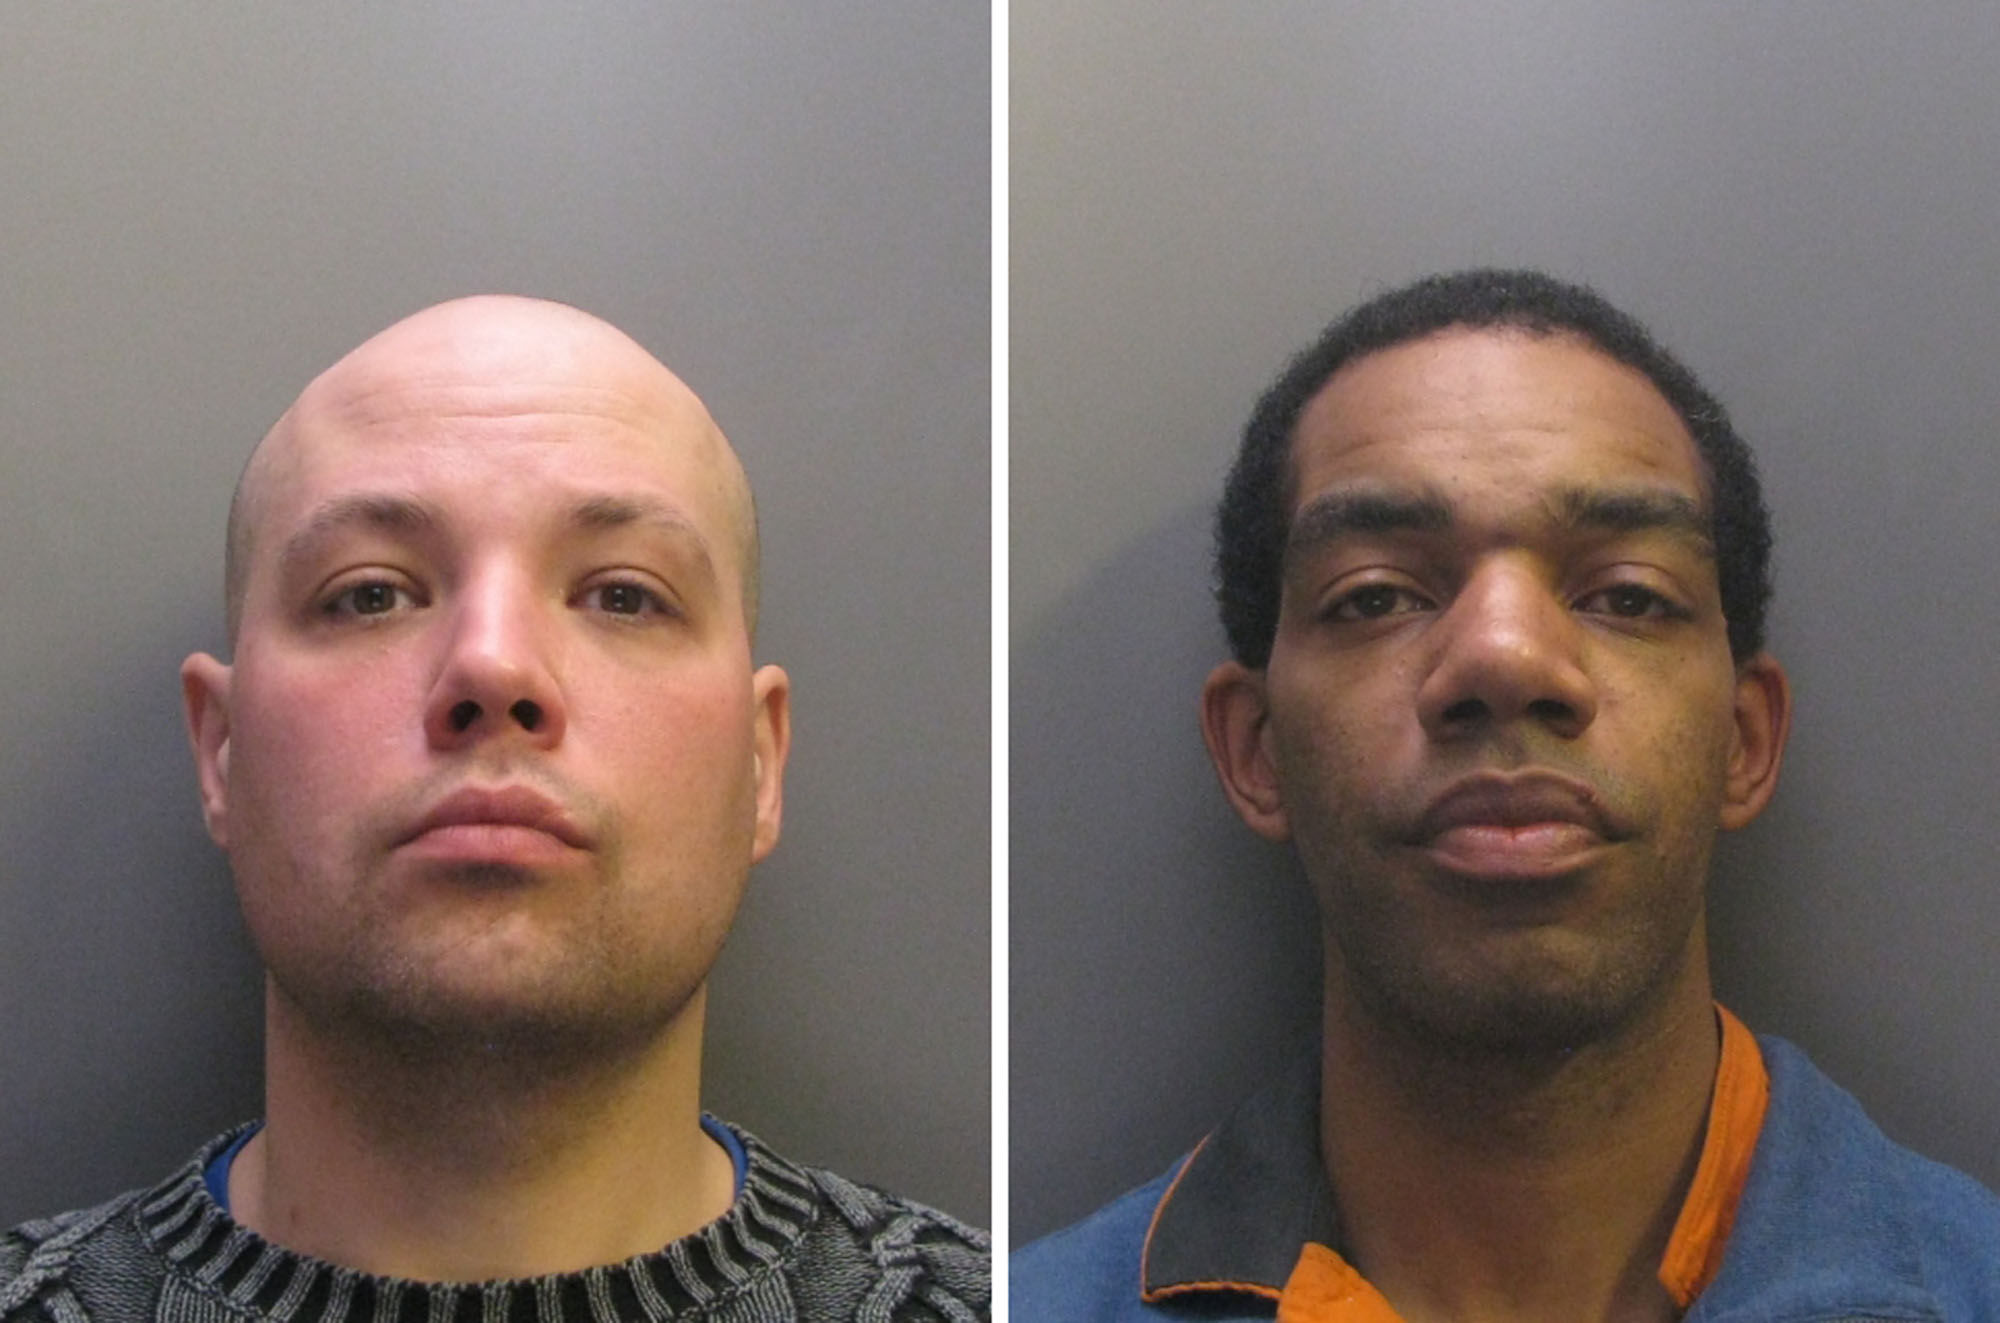 'Ruthless' burglars who tied up and tortured elderly couple before stealing £20,000 worth of valuables jailed for 15 years